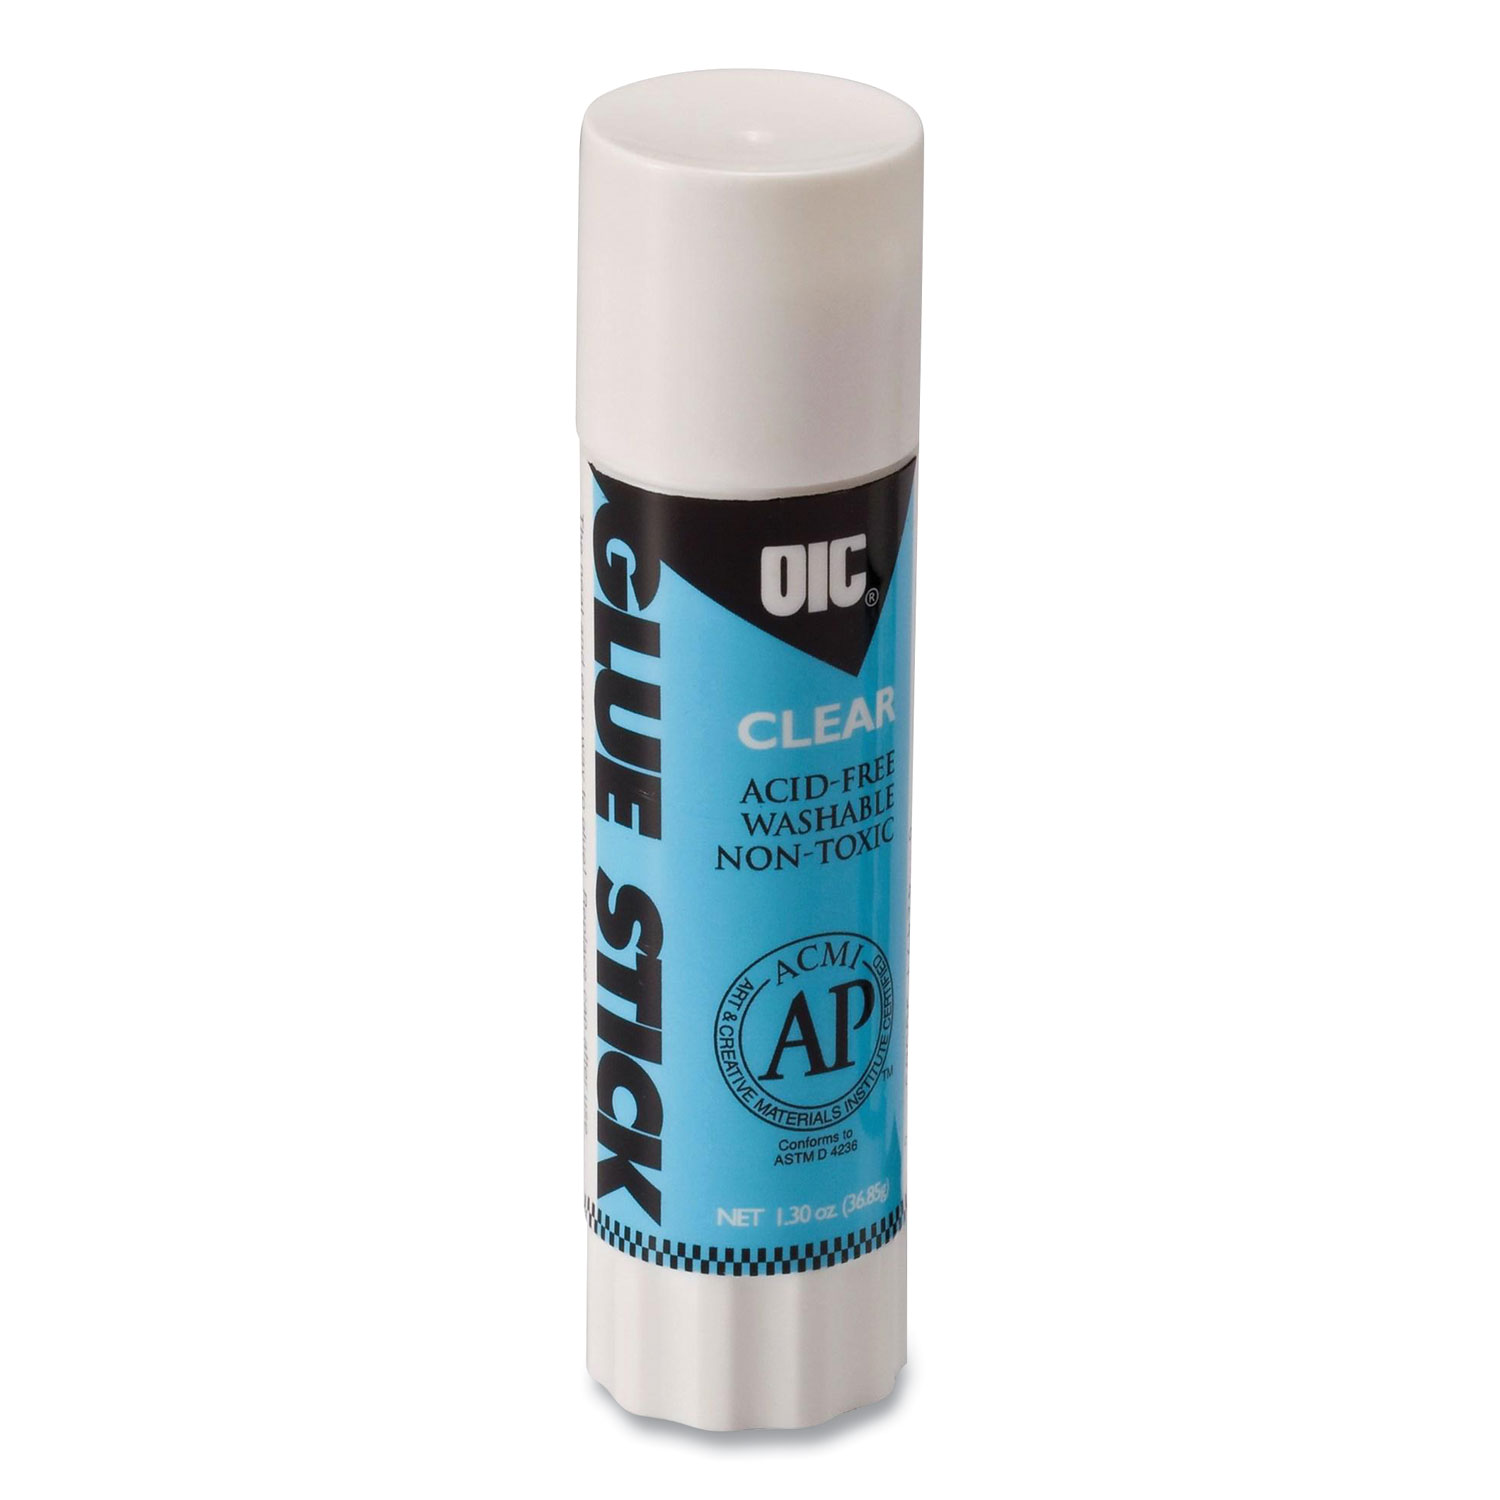  Officemate 50002 Clear Glue Stick, 0.74 oz, Dries Clear (OIC368201) 